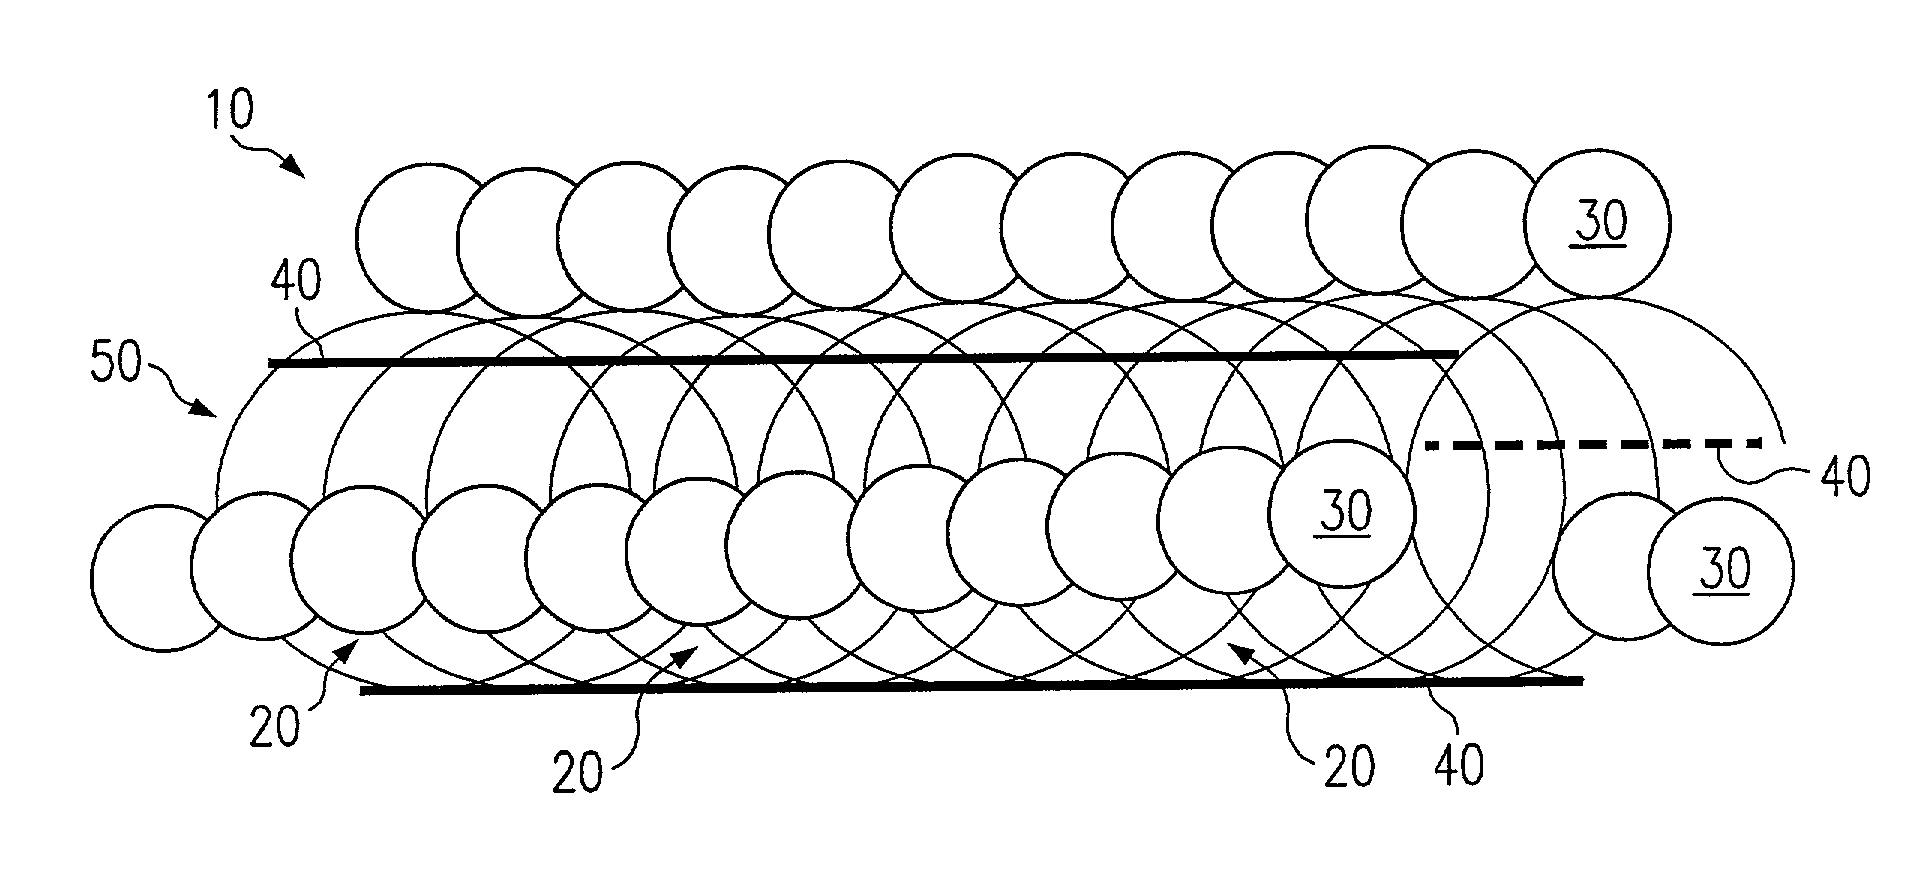 Expandable biodegradable polymeric stents for combined mechanical support and pharmacological or radiation therapy